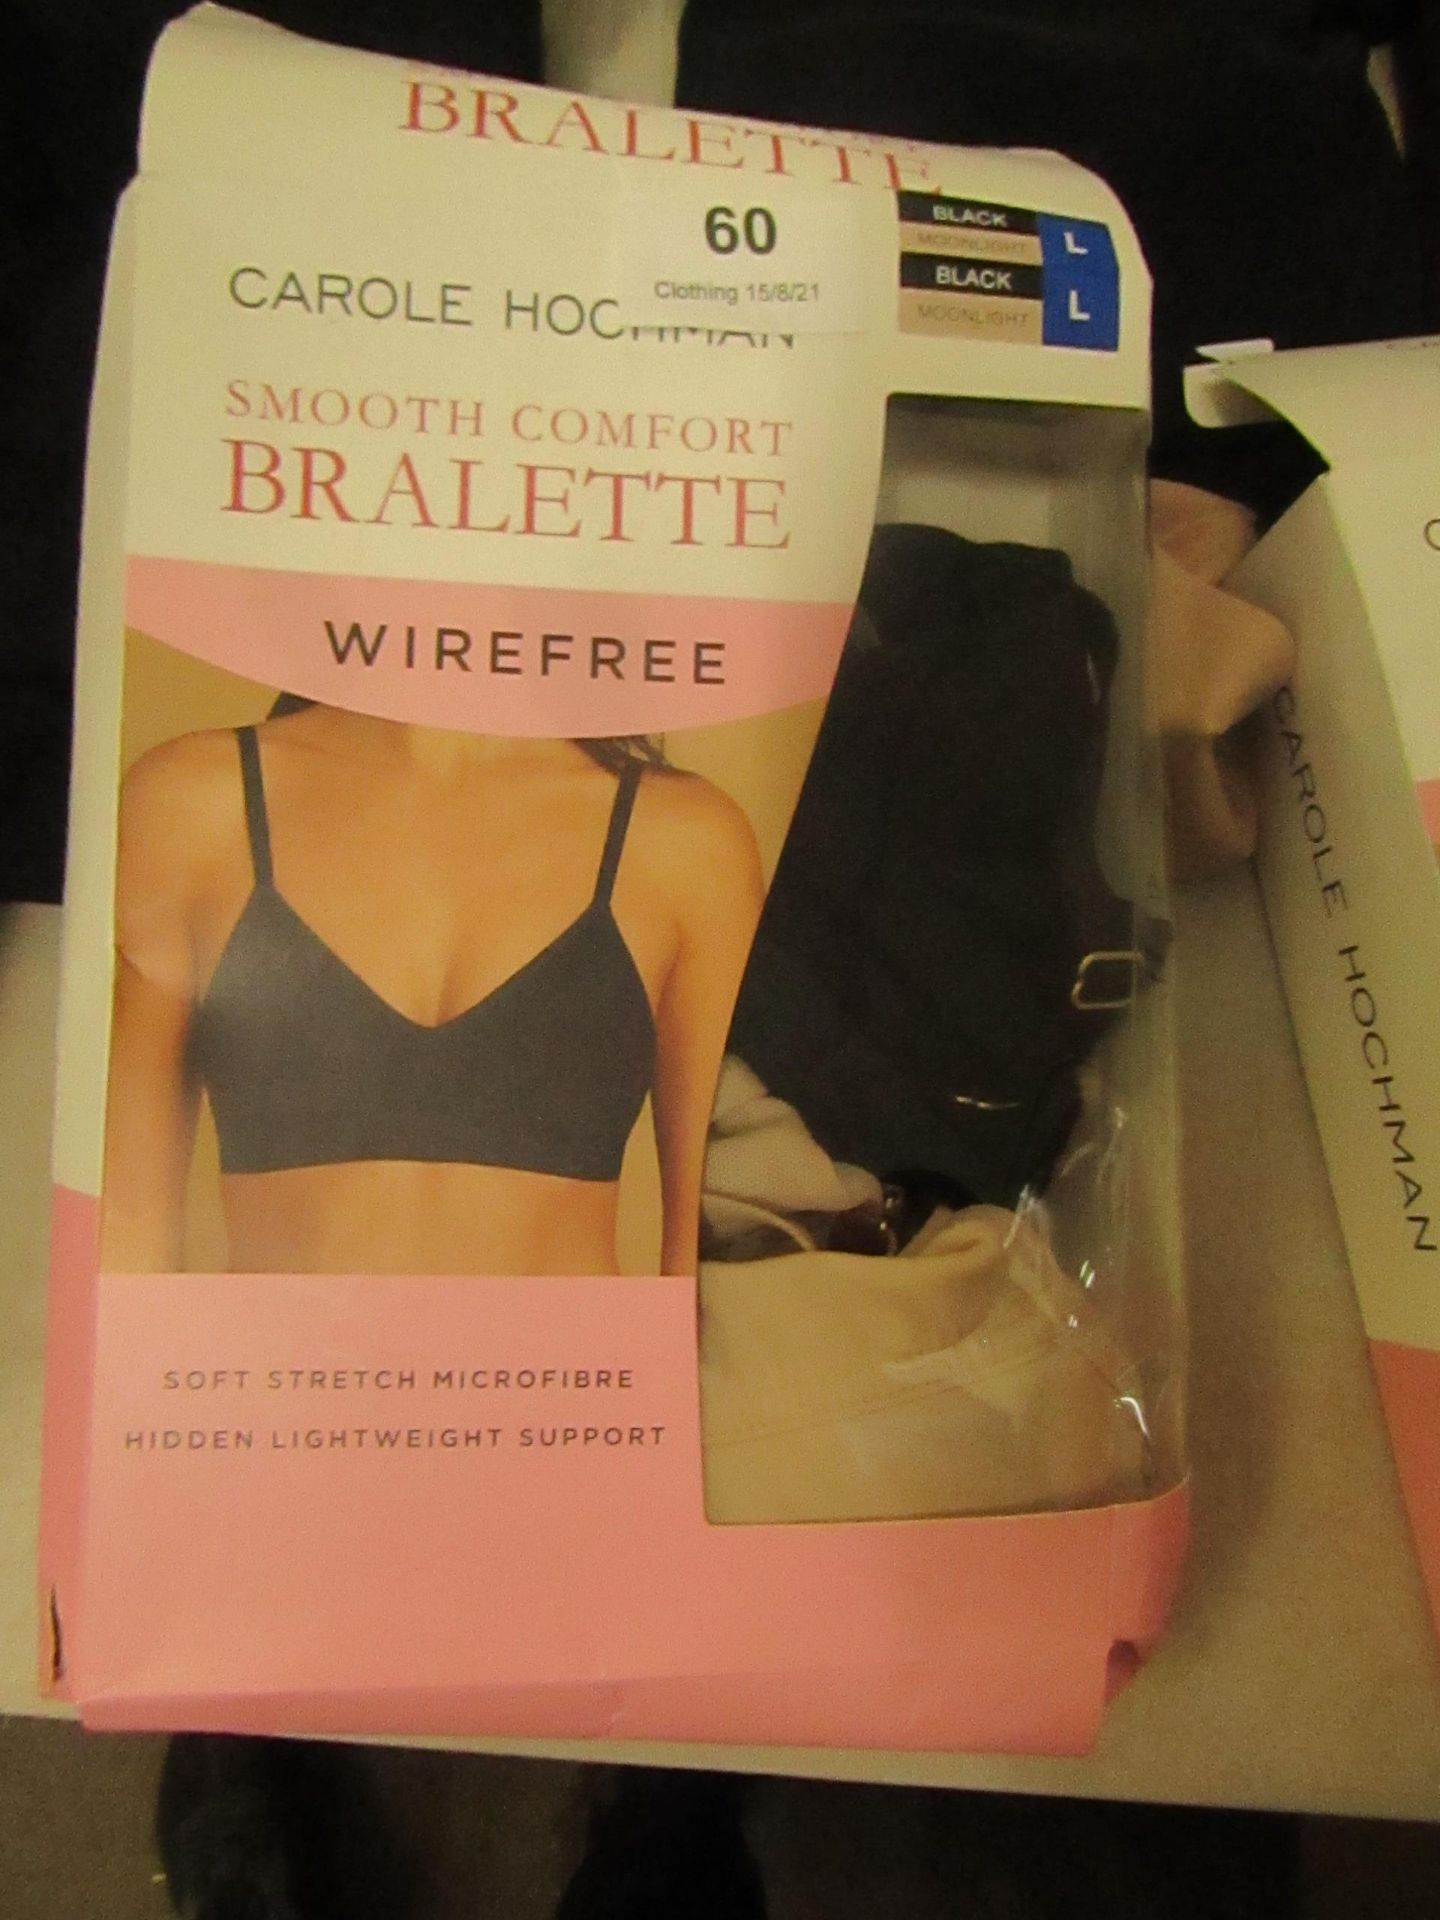 Carol Hockman pack of 2 wire free Bralettes, with packaging, size large